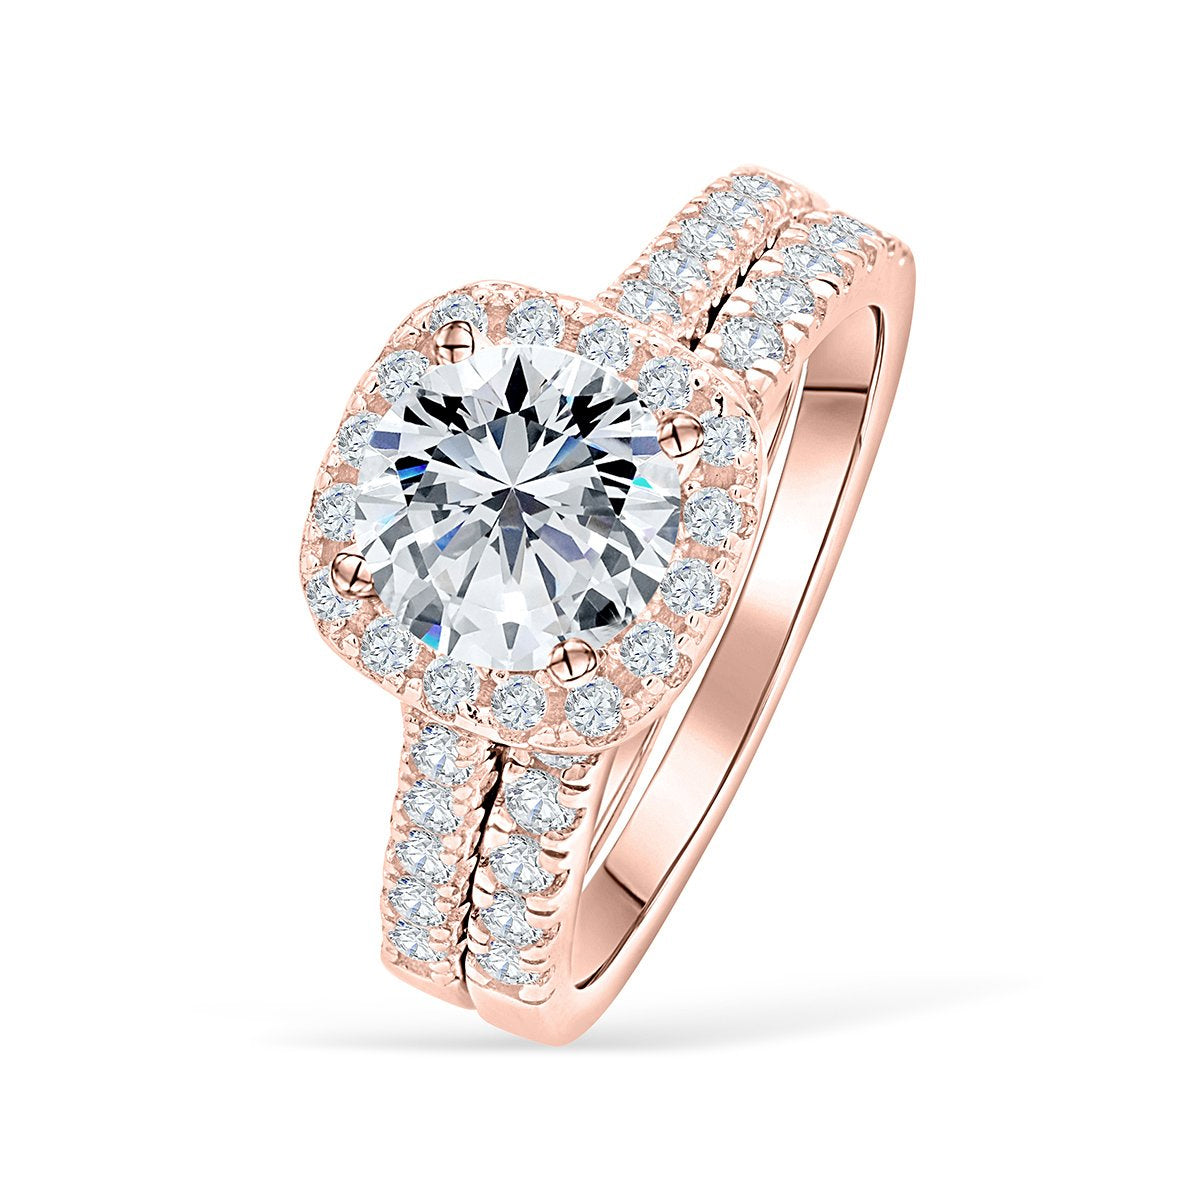 25 Gorgeous Engagement Rings You Can Get For Less Than $100 — Really! |  Engagement rings under 100, Aquamarine gold ring, Gorgeous engagement ring